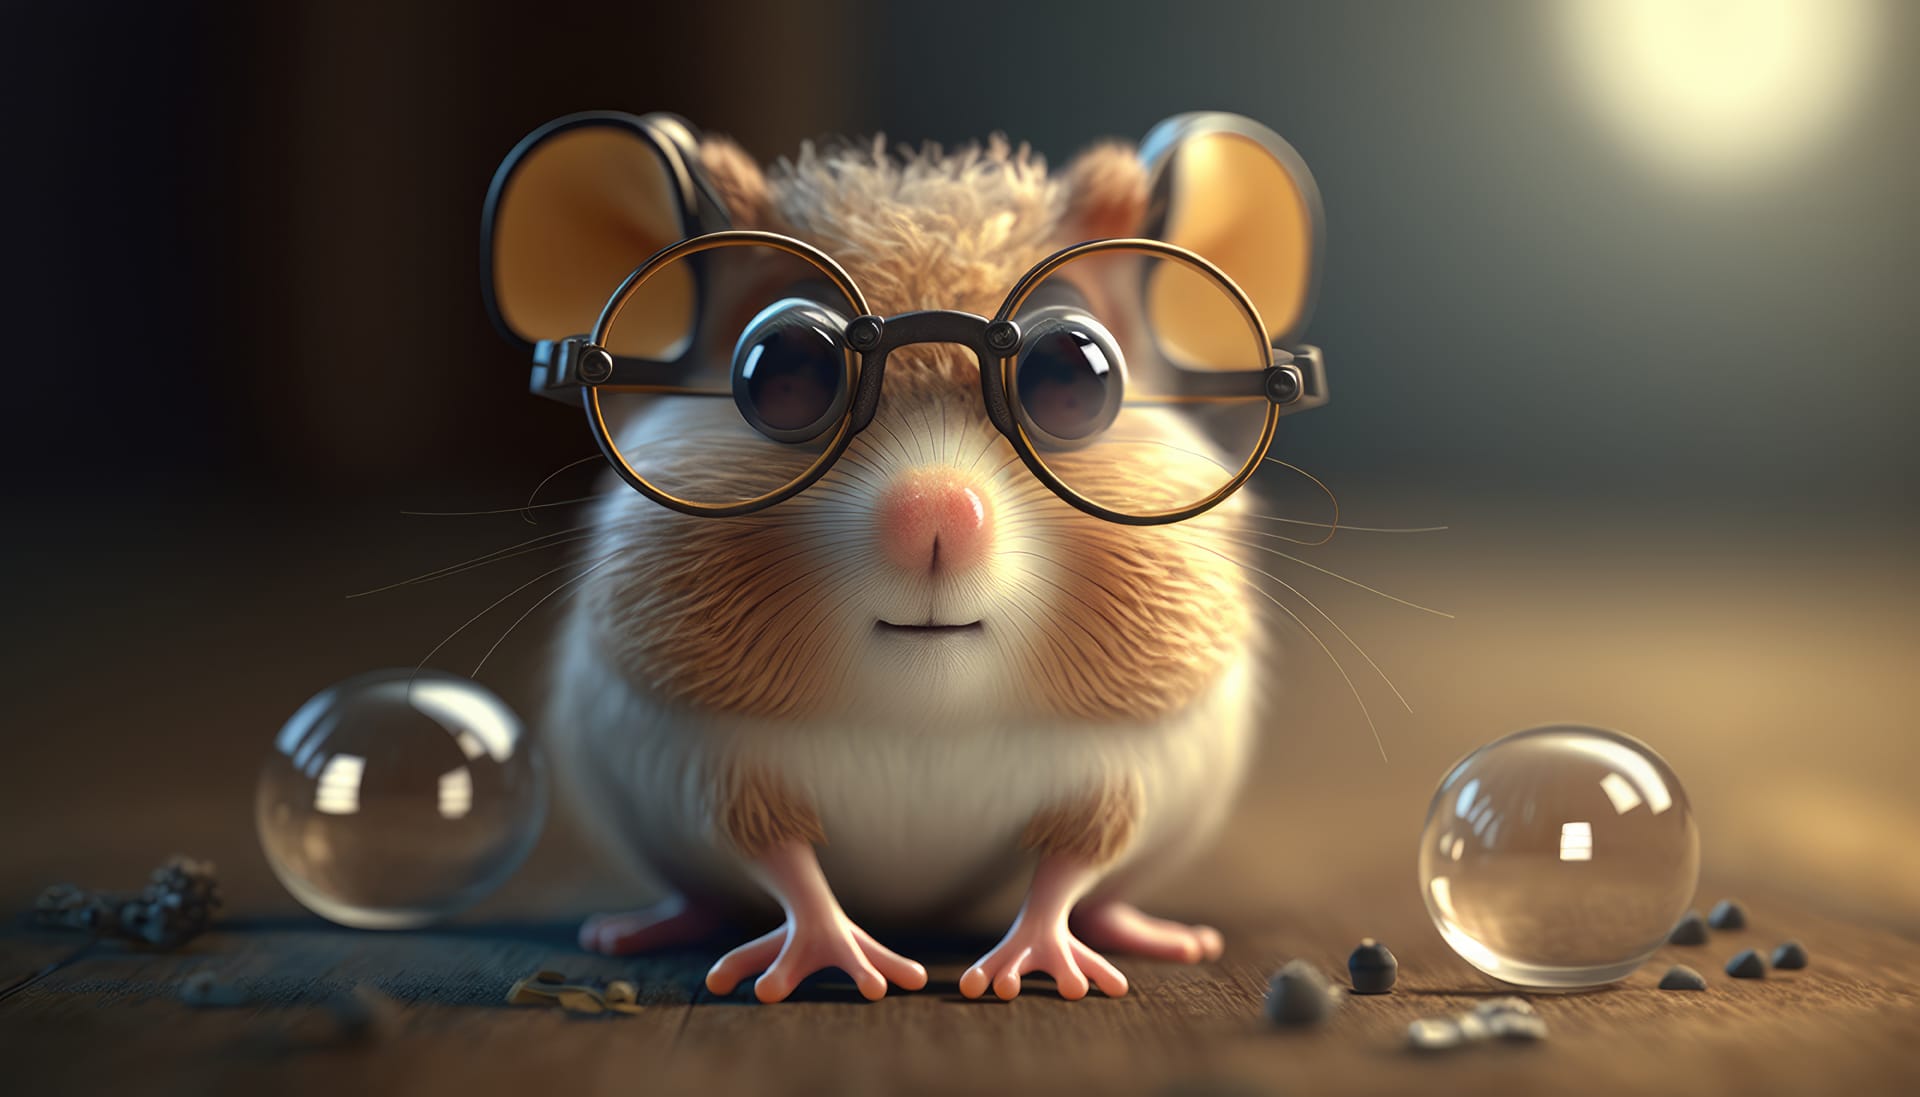 Hamster wearing glasses sits table with light bulb background